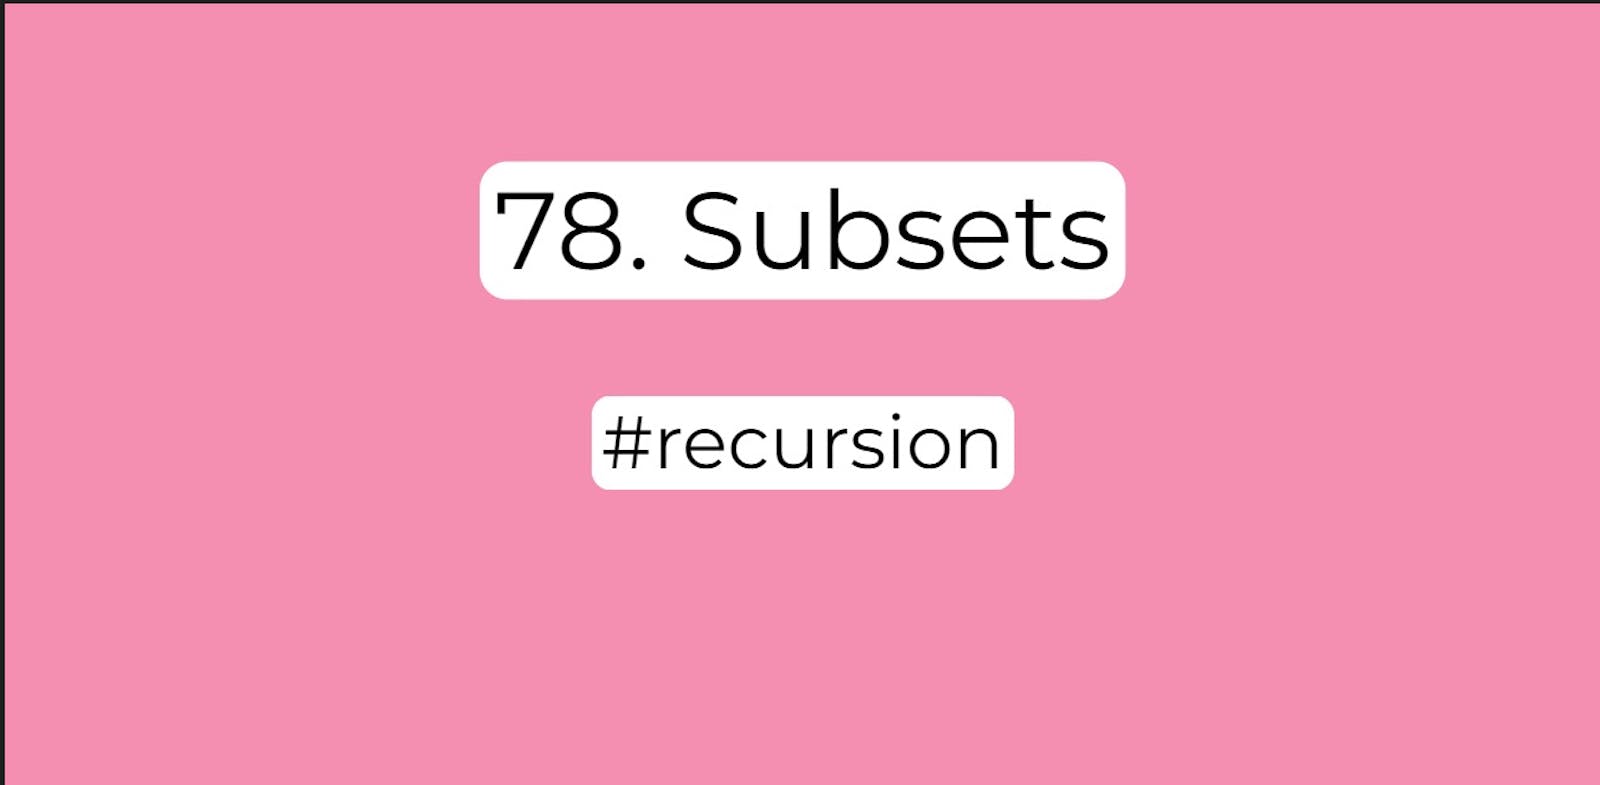 78. Subsets